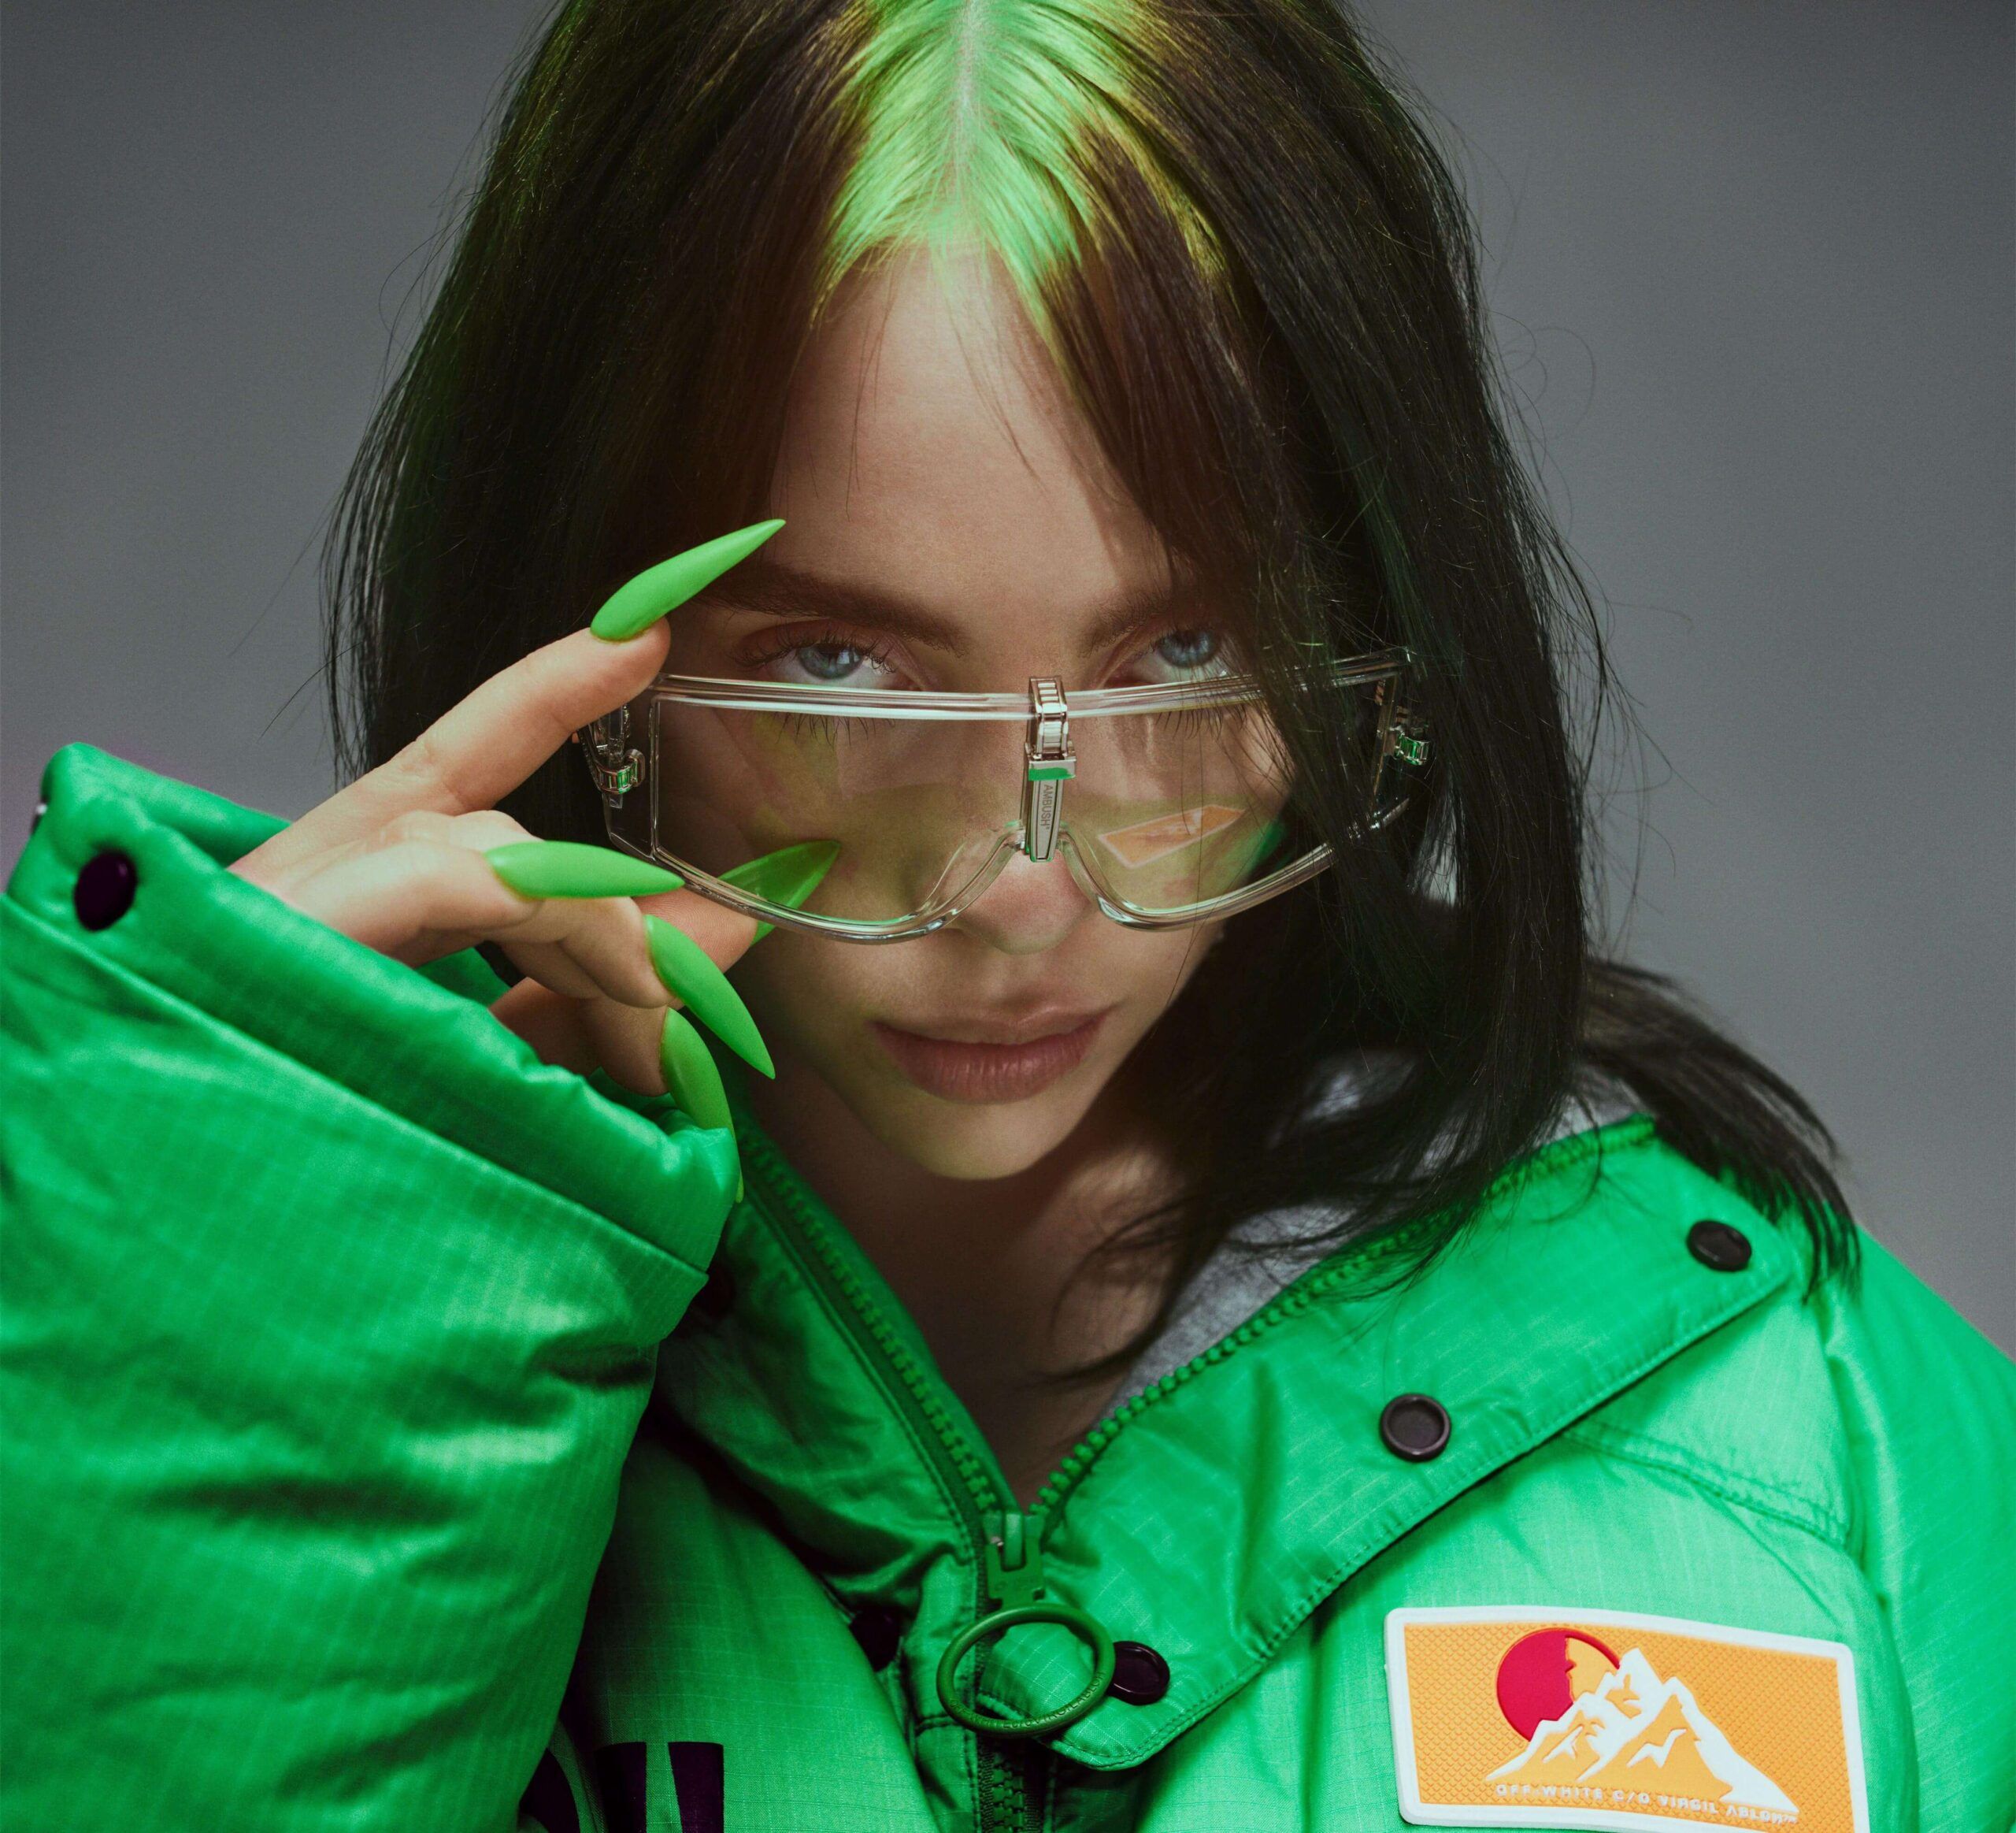 Billie Eilish Green Hair: Times She Rocked The Look & How You Can Too